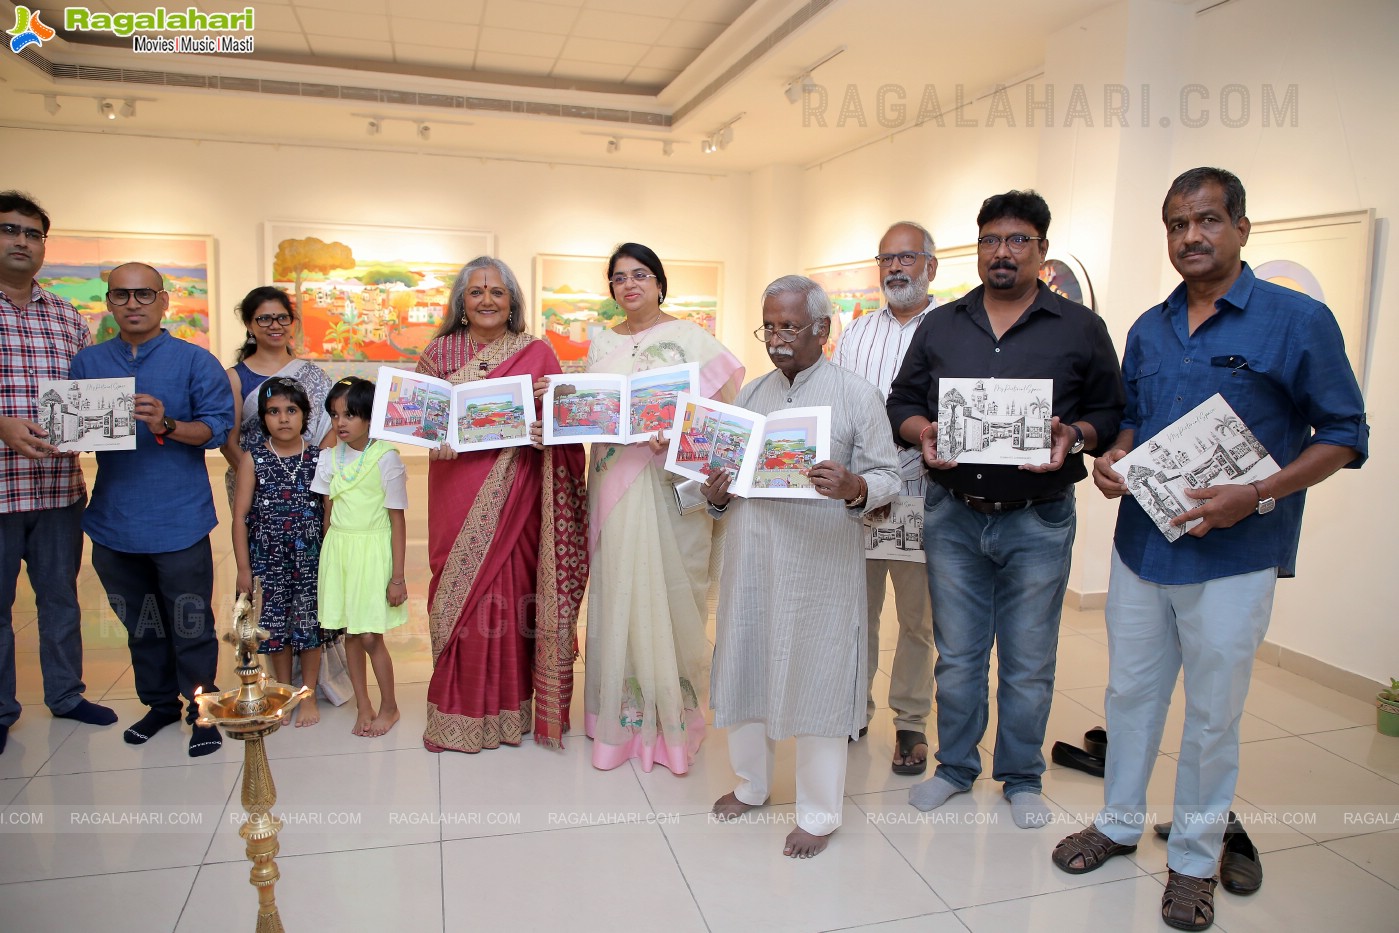 Art Exhibition 'My Pictorial Space' at Chitramayee State Gallery of Art, Hyderabad